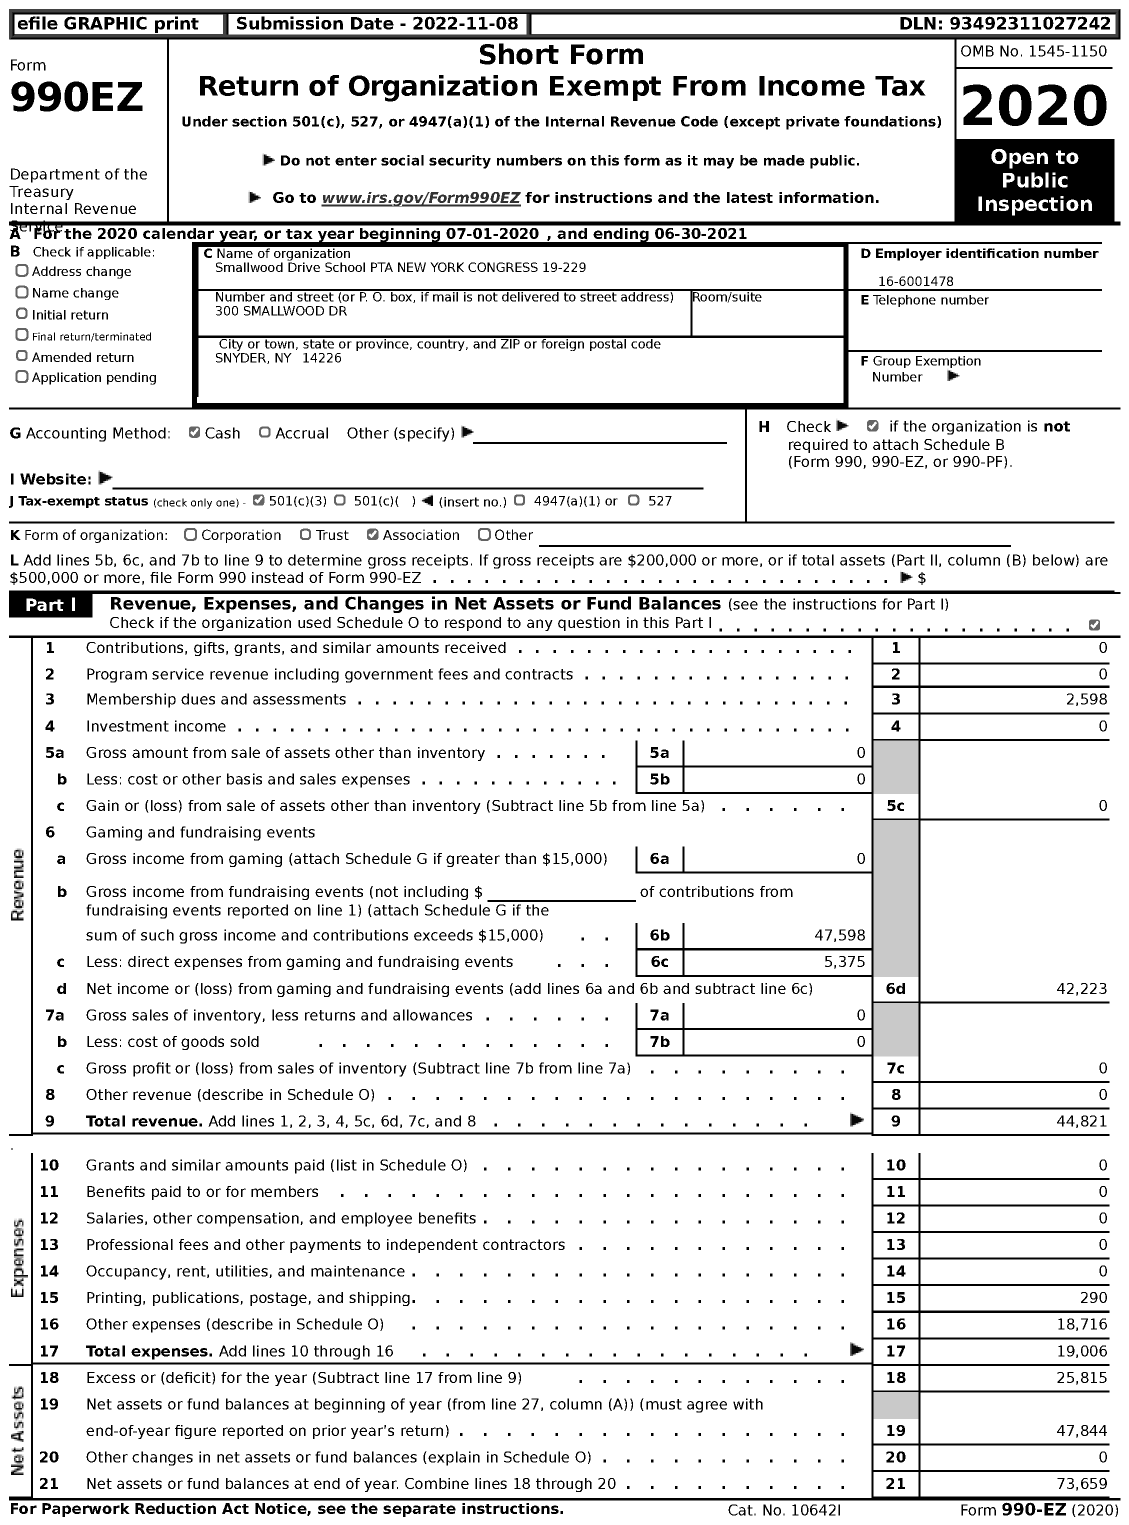 Image of first page of 2020 Form 990EZ for NEW YORK State PTA - 19-229 Smallwood Drive School PTA